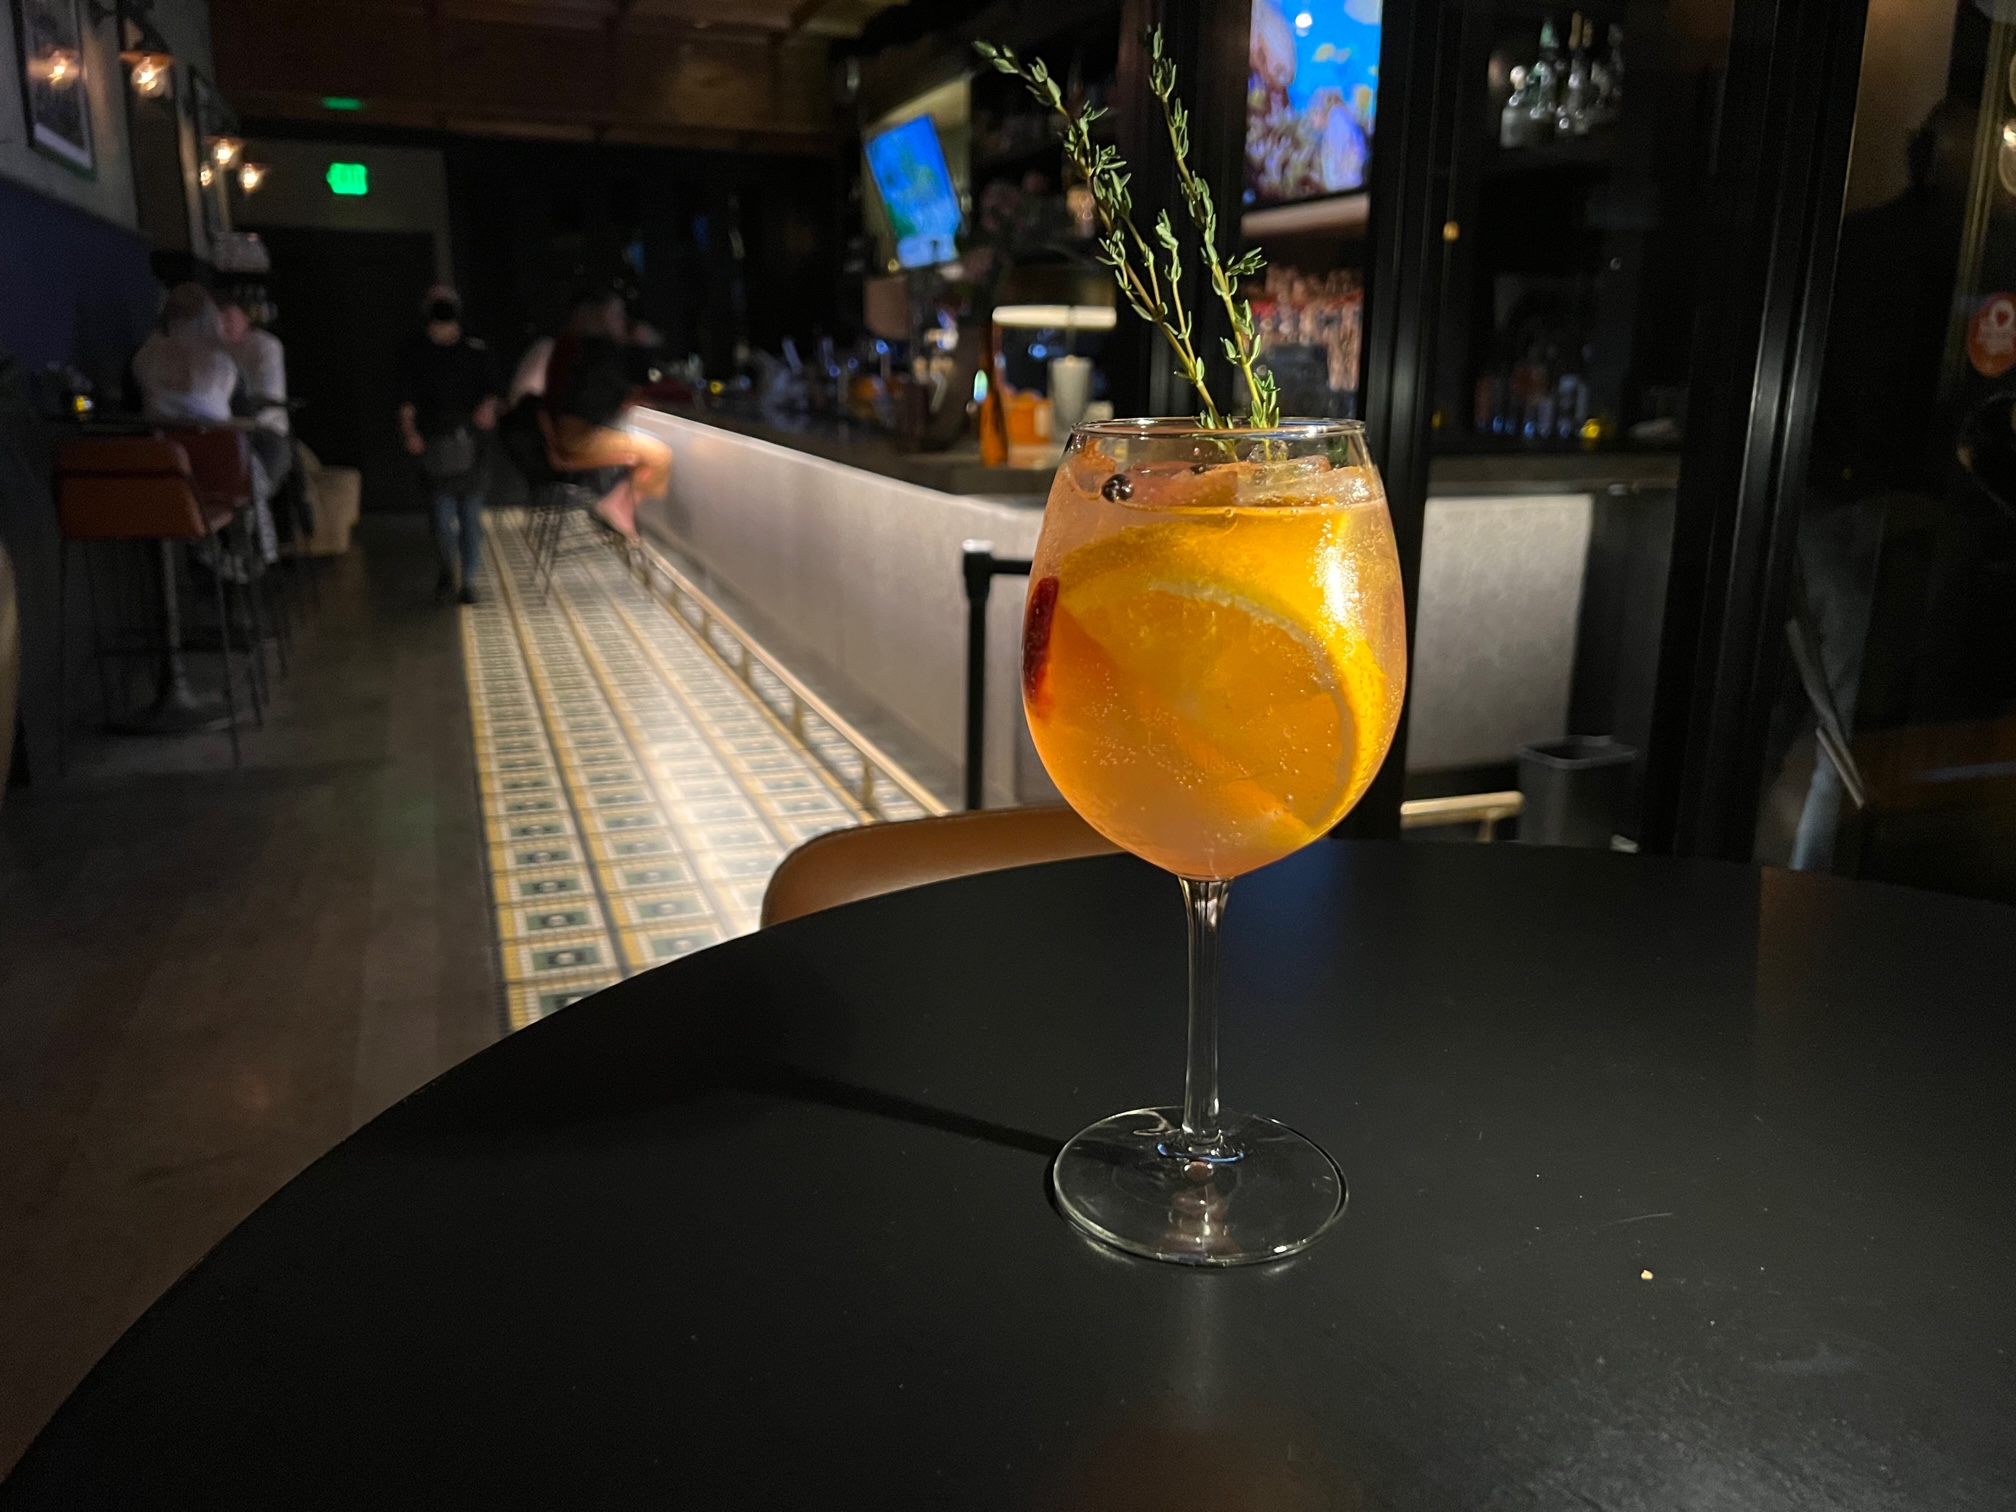 In a dimly lit bar, there is an orange cocktail in a wine glass on a circular black table. The glass has orange slices, strawberries, and springs of thyme in it. Photo by Alyssa Buckley.